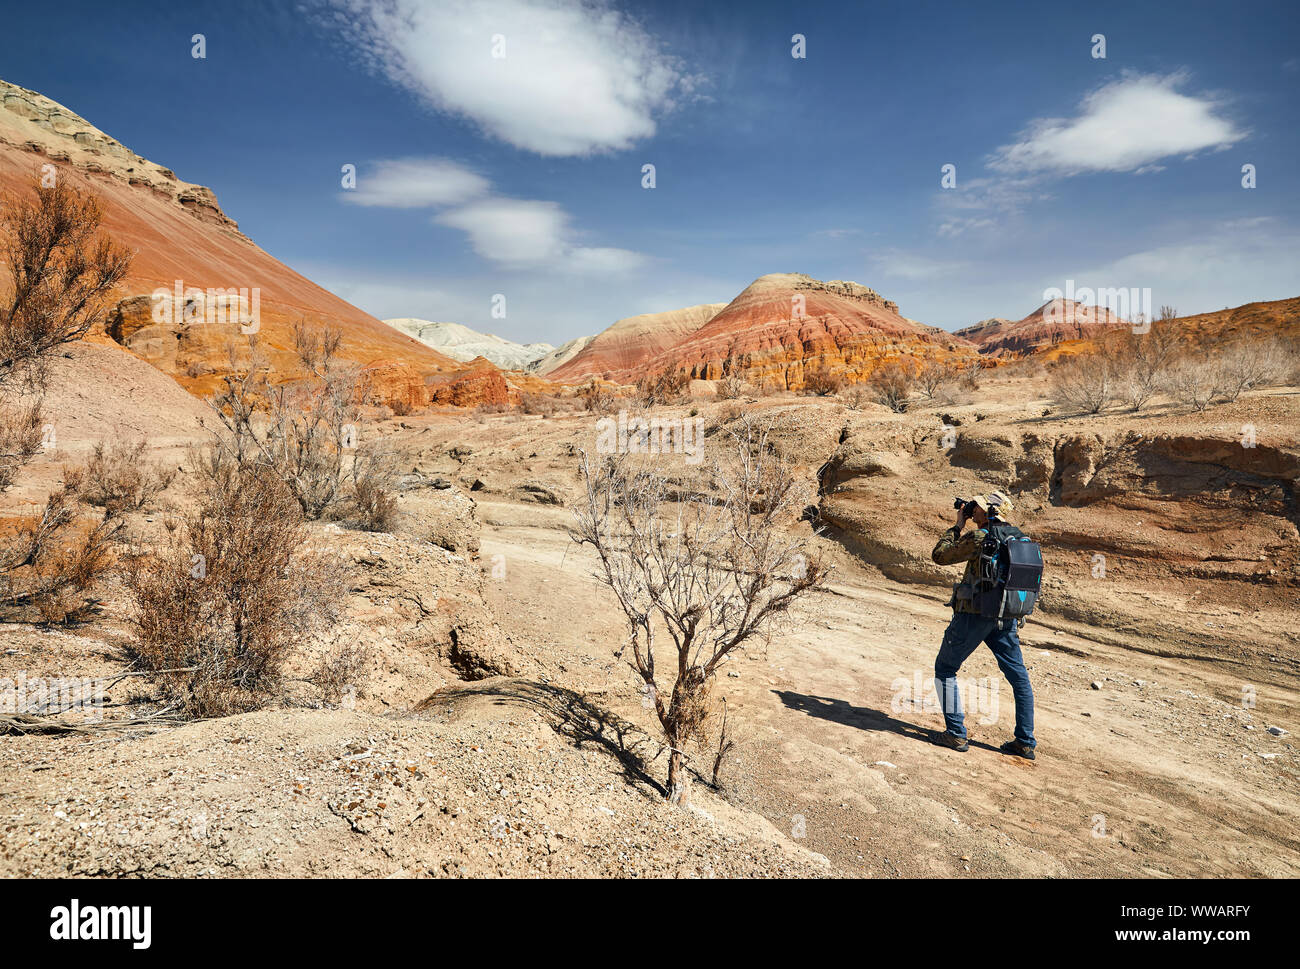 Tourist with backpack and camera taking a picture at the dusty canyon on surreal red mountains against blue sky in the desert Stock Photo